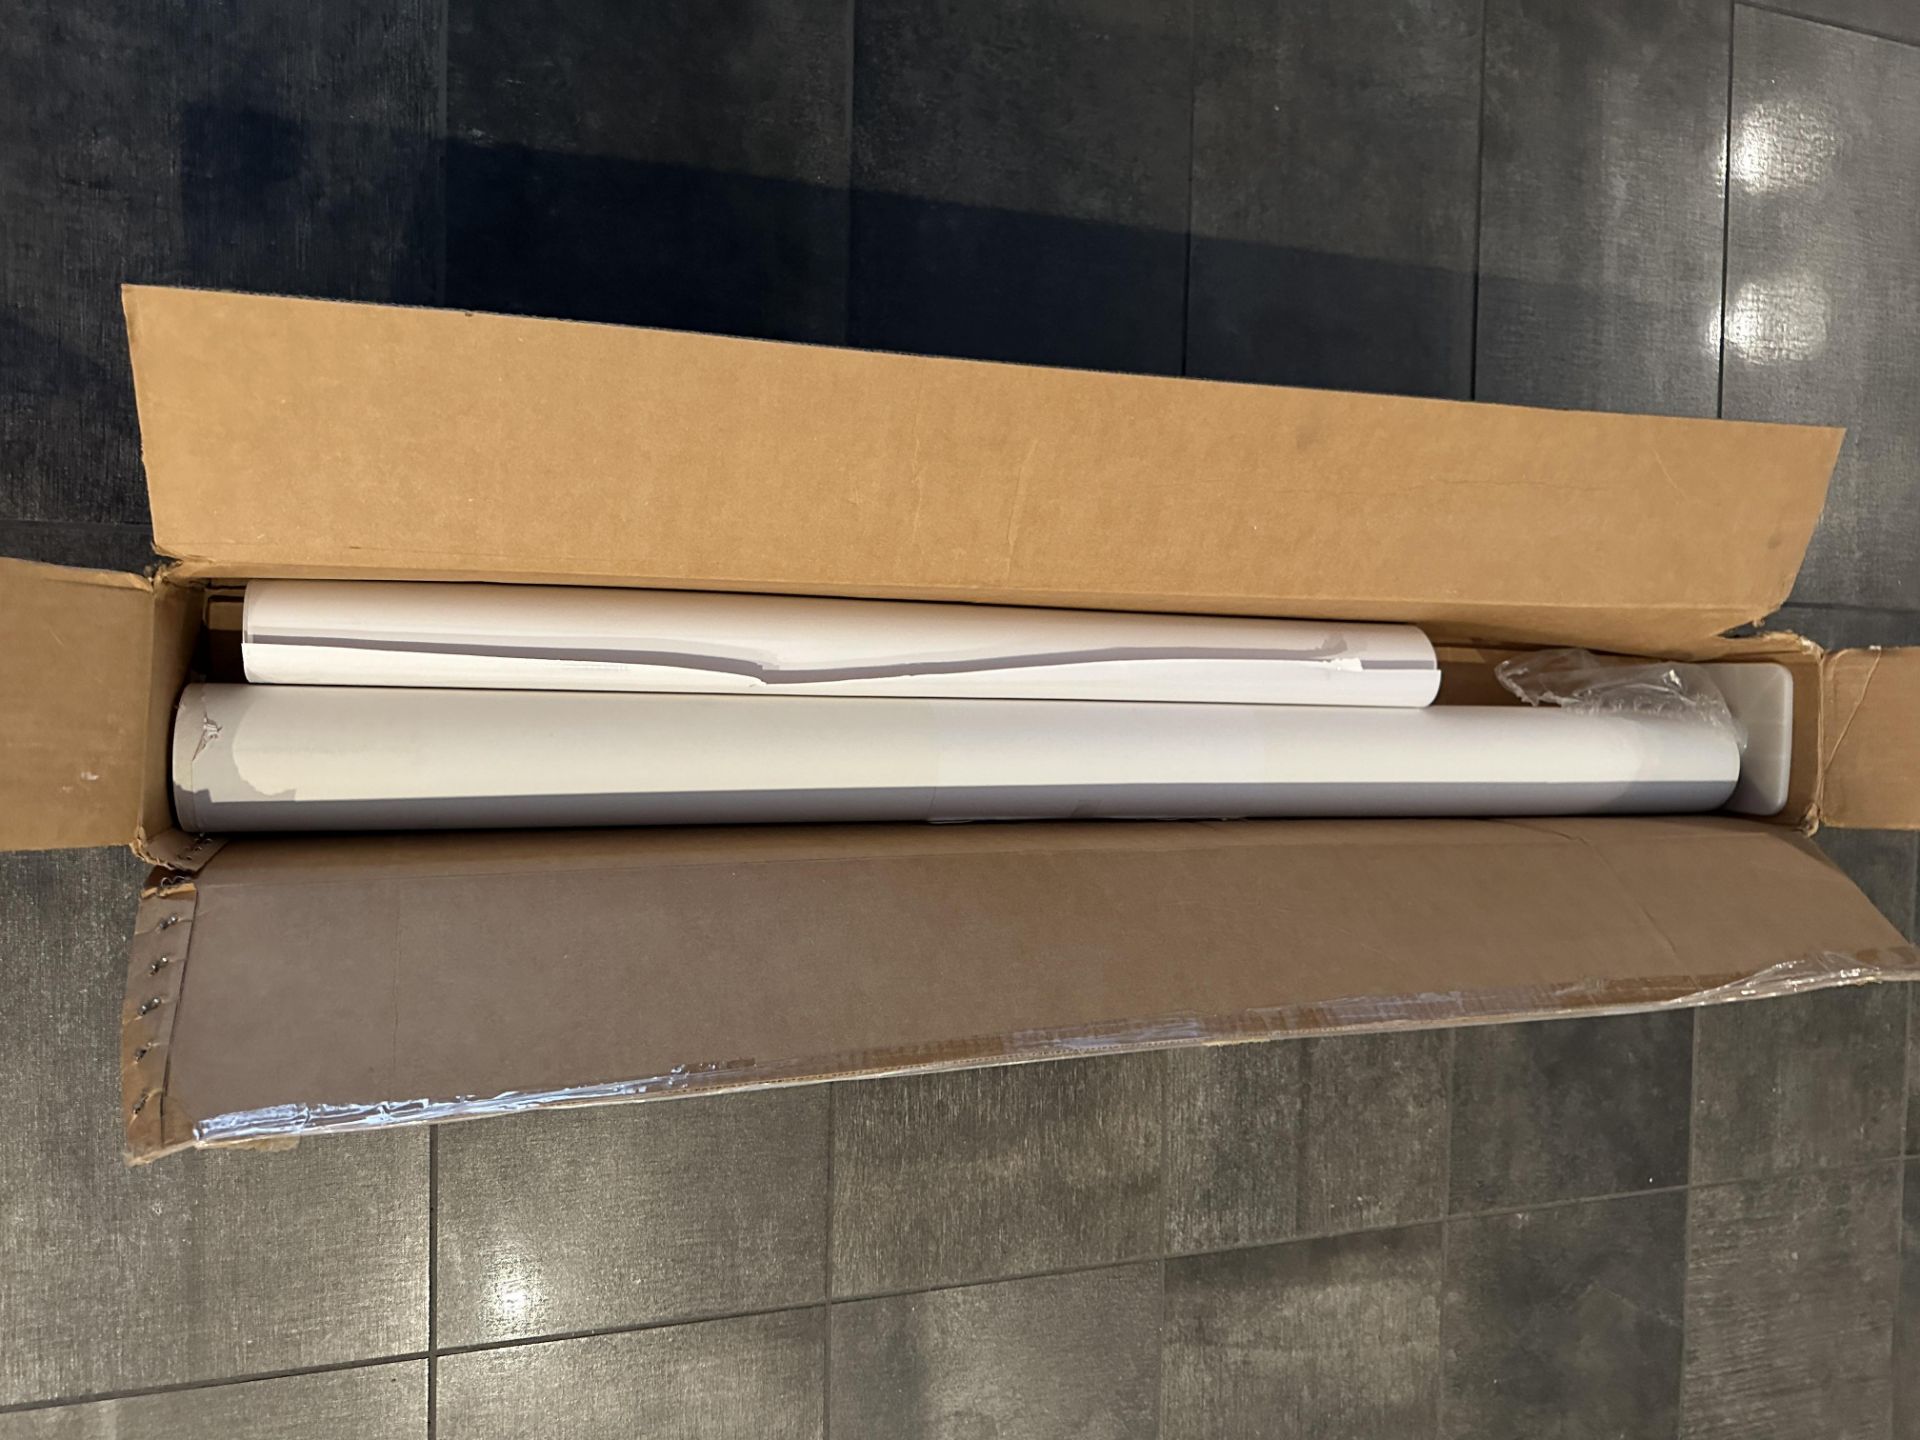 TWO LARGE PRINT FORMAT ROLLS OF PAPER